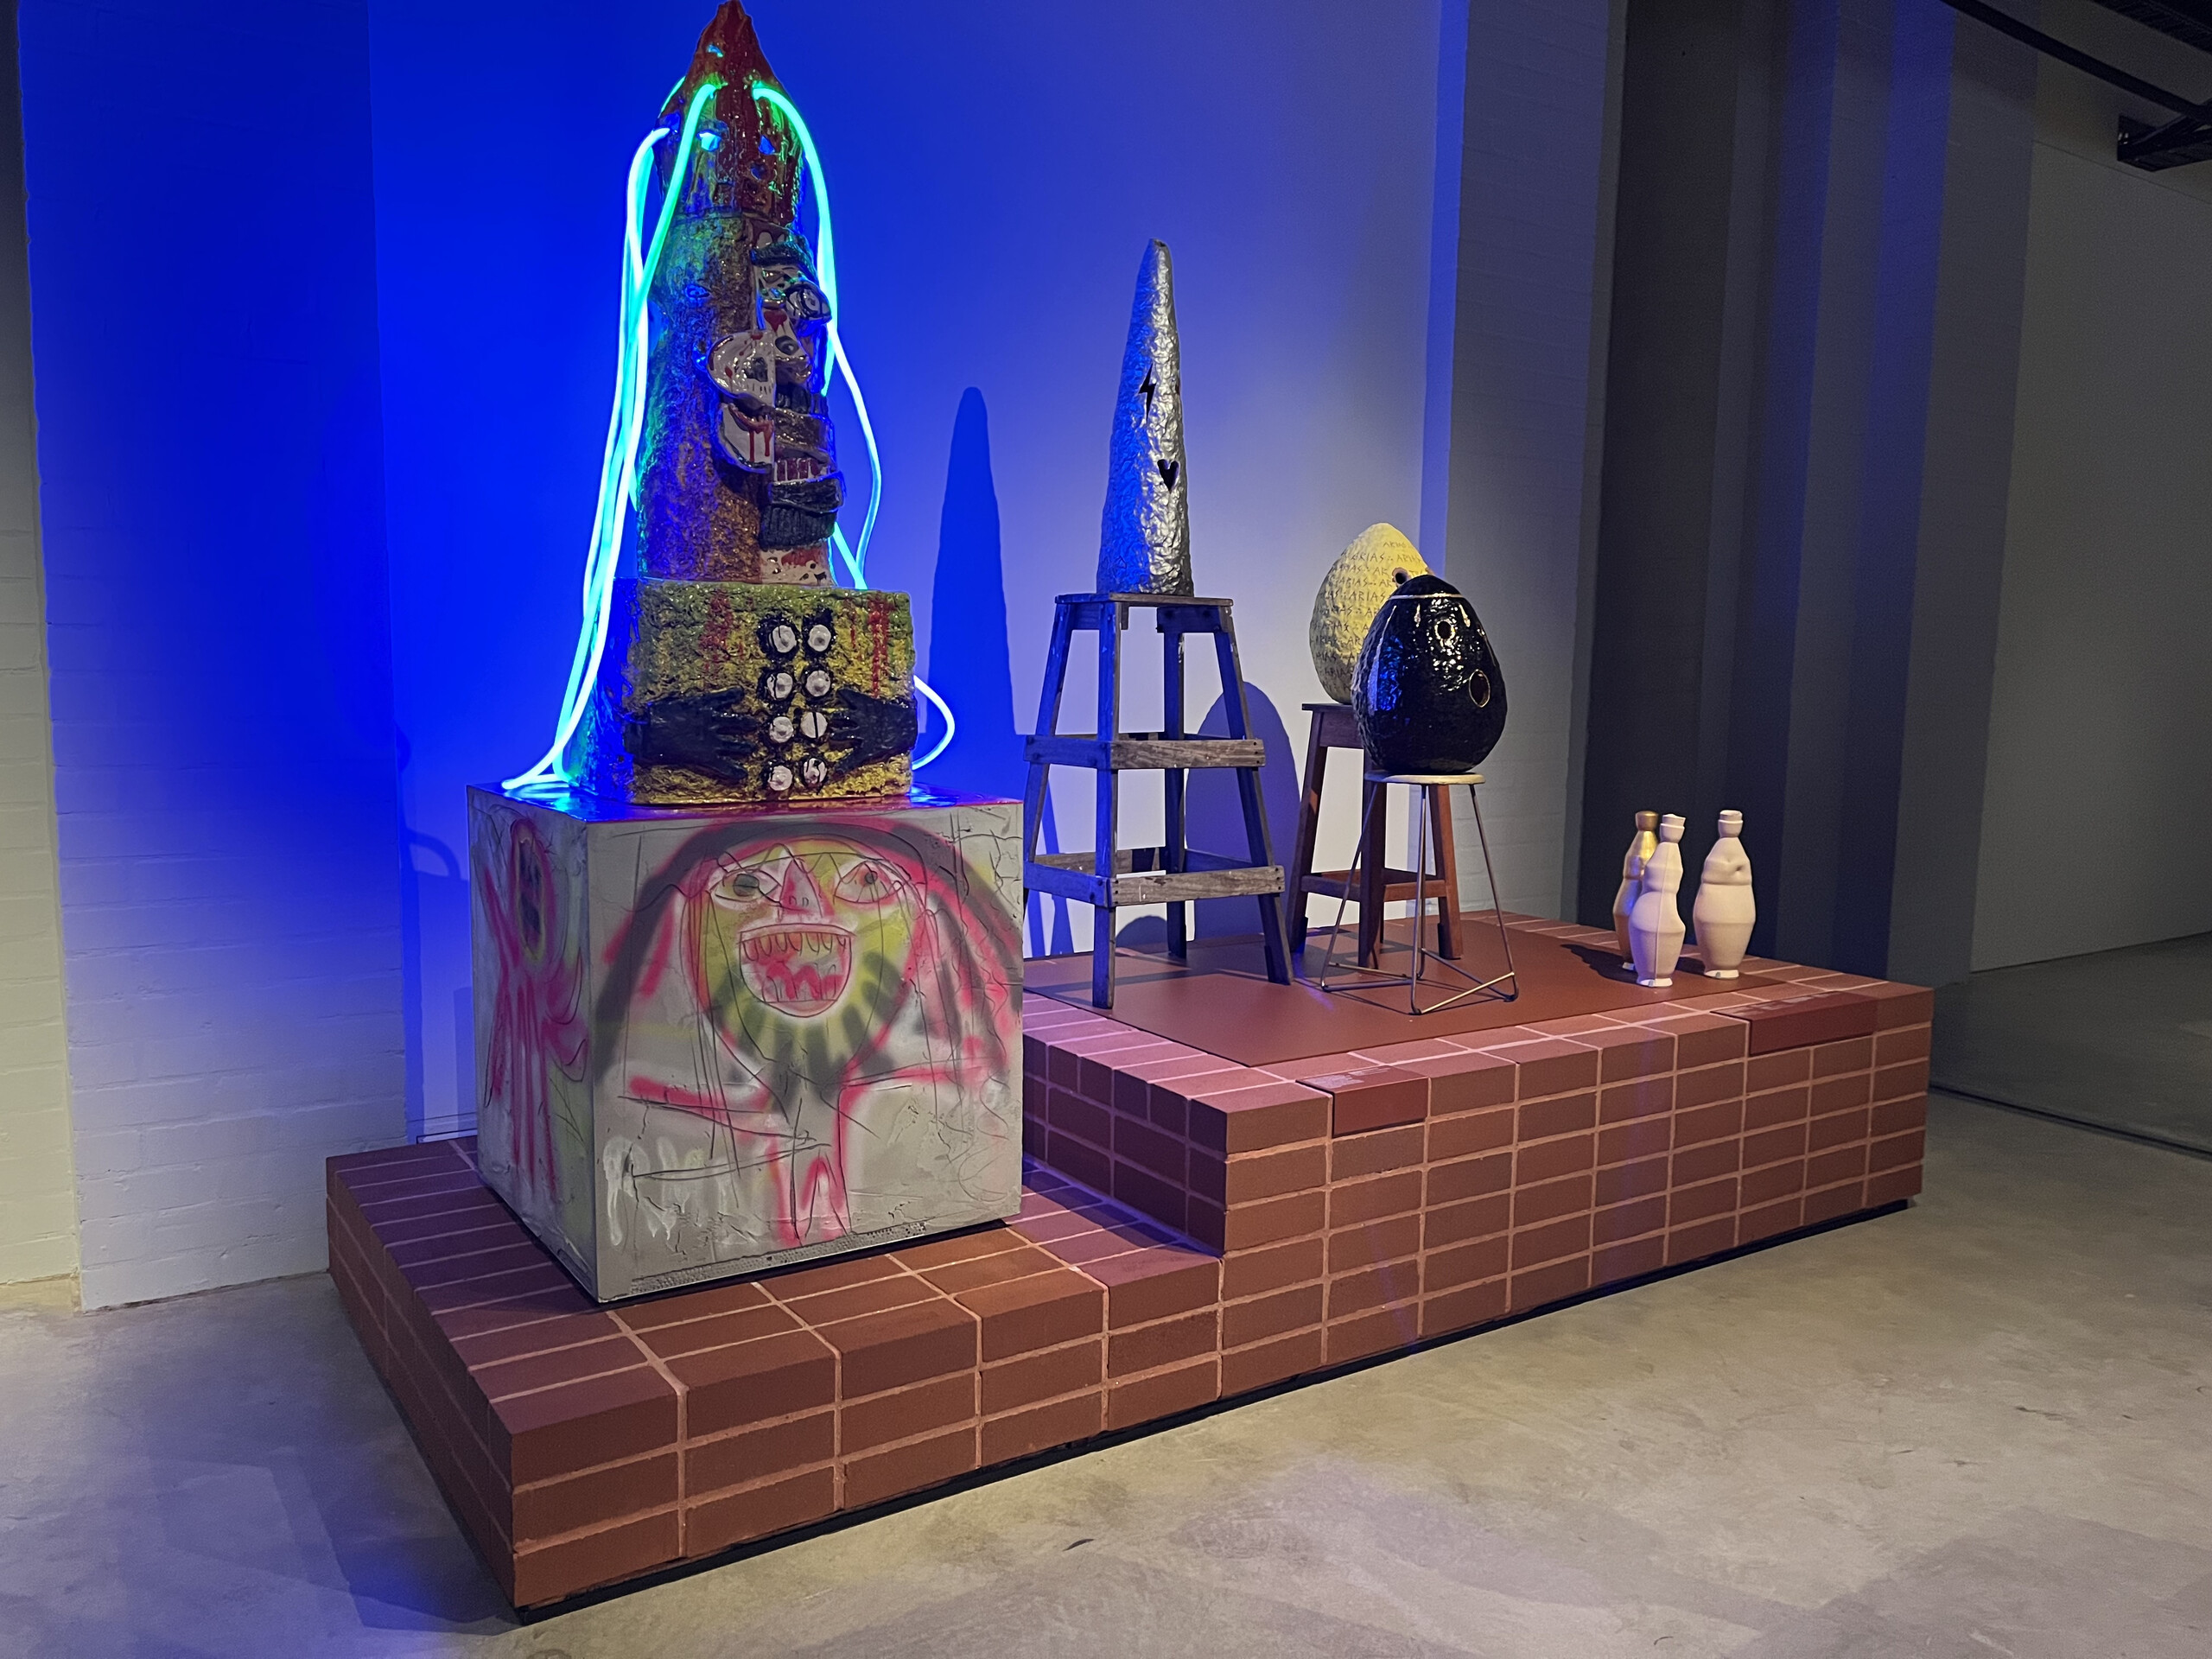 Installation view of Ramesh Mario Nithiyendran, <em>Hog/Human</em>, earthenware, mixed media, 2019 (left) and, Nell, three works <em>the Saxophone, yes</em> Nell, ARIAS 2017, painted earthenware and wood, 2016-2017, Sydney (right). Photo: Victoria Pham